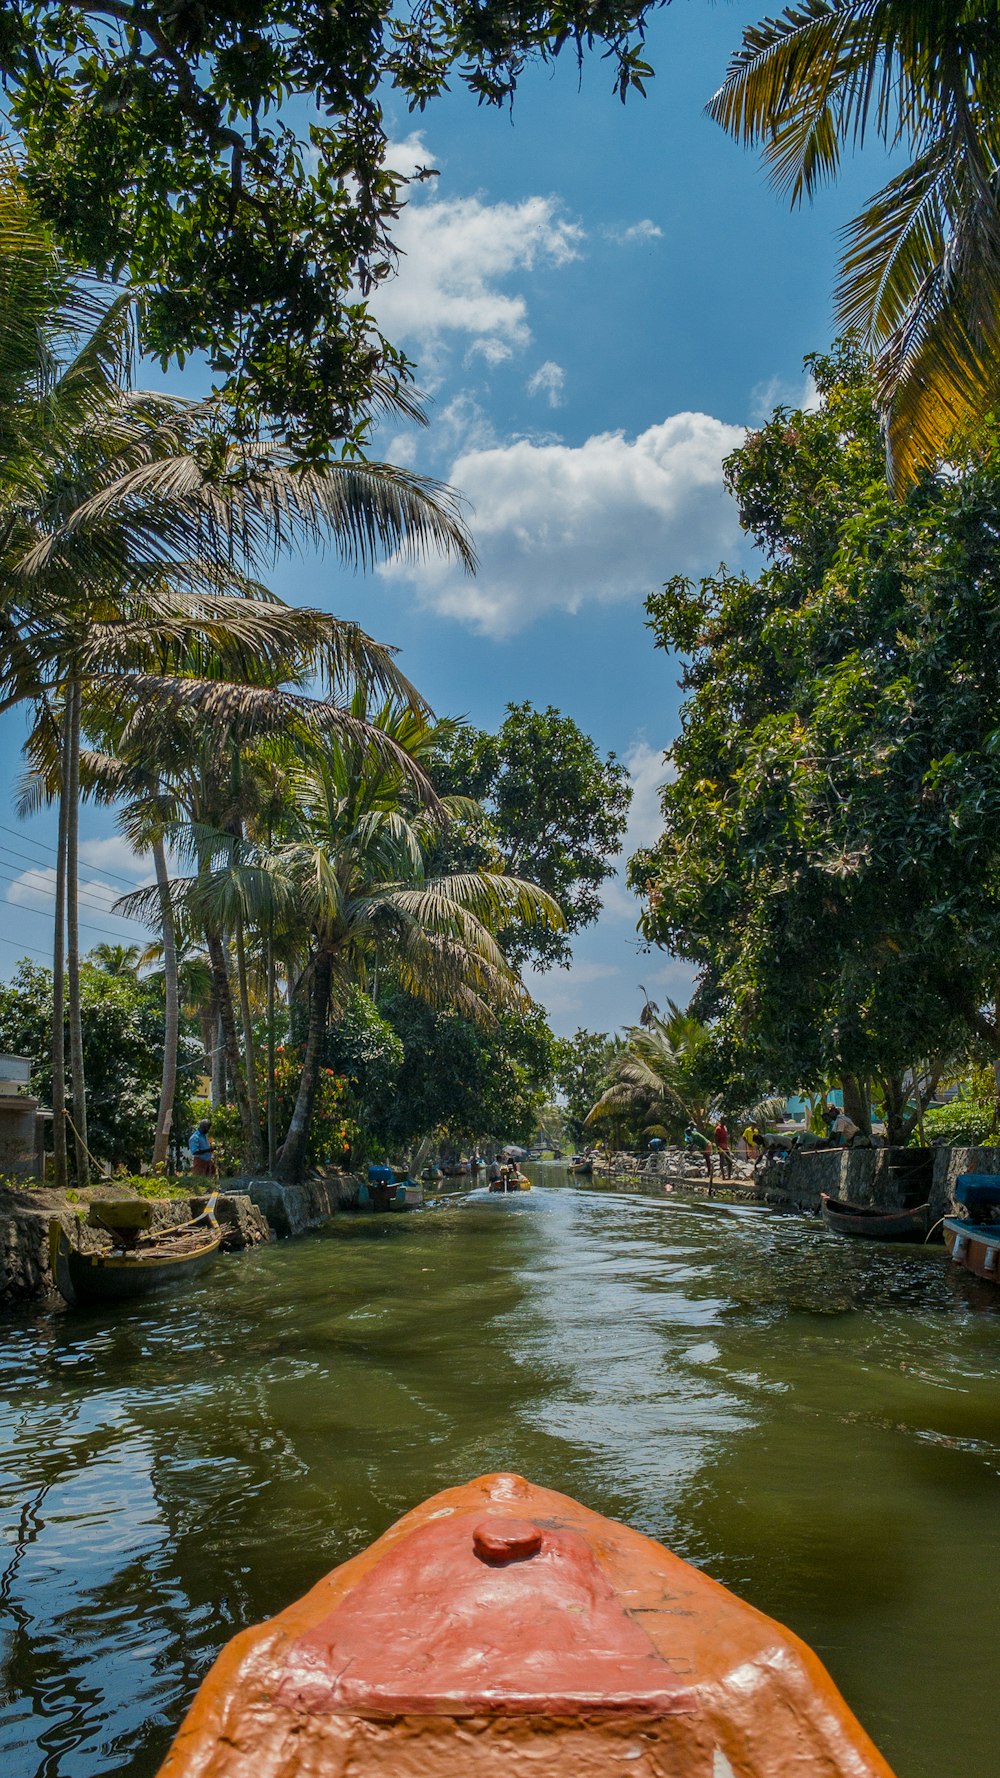 a boat traveling down a river surrounded by palm trees